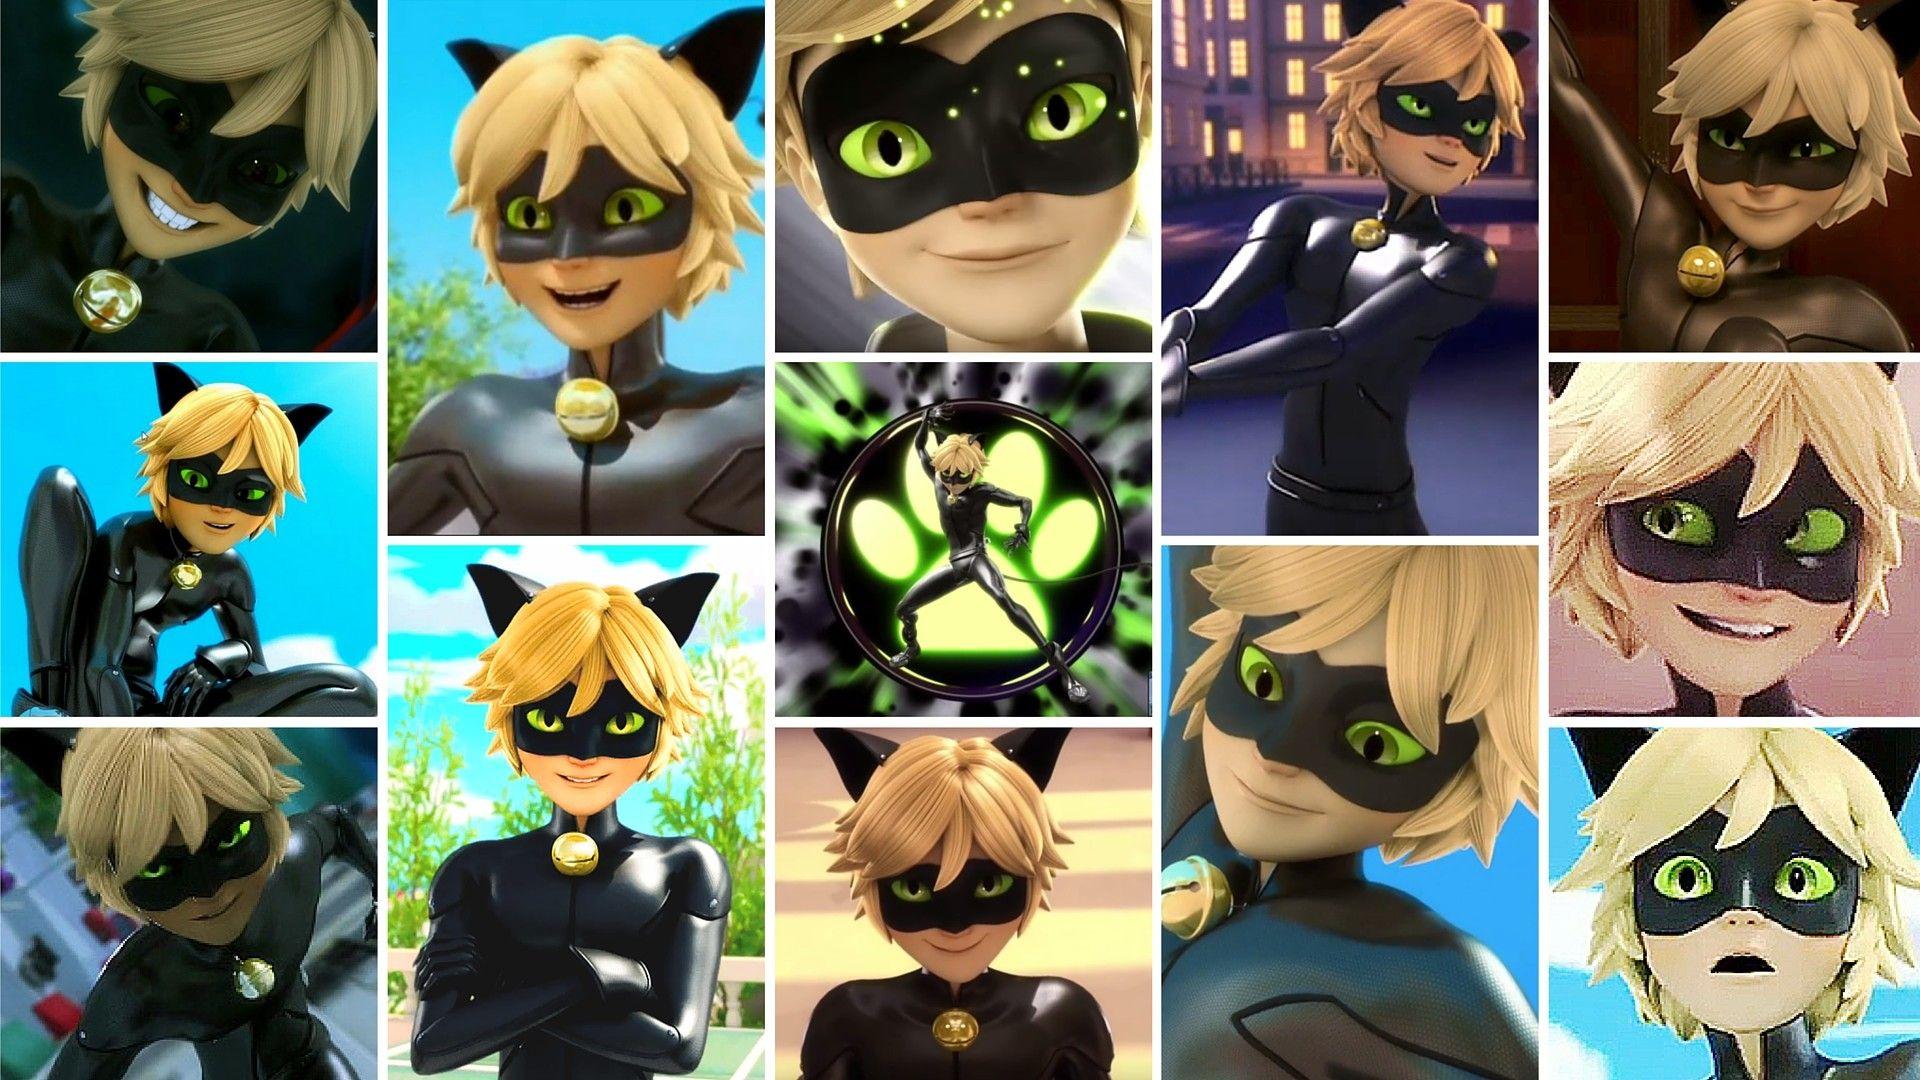 miraculous ladybug and cat noir wallpaper in 2020